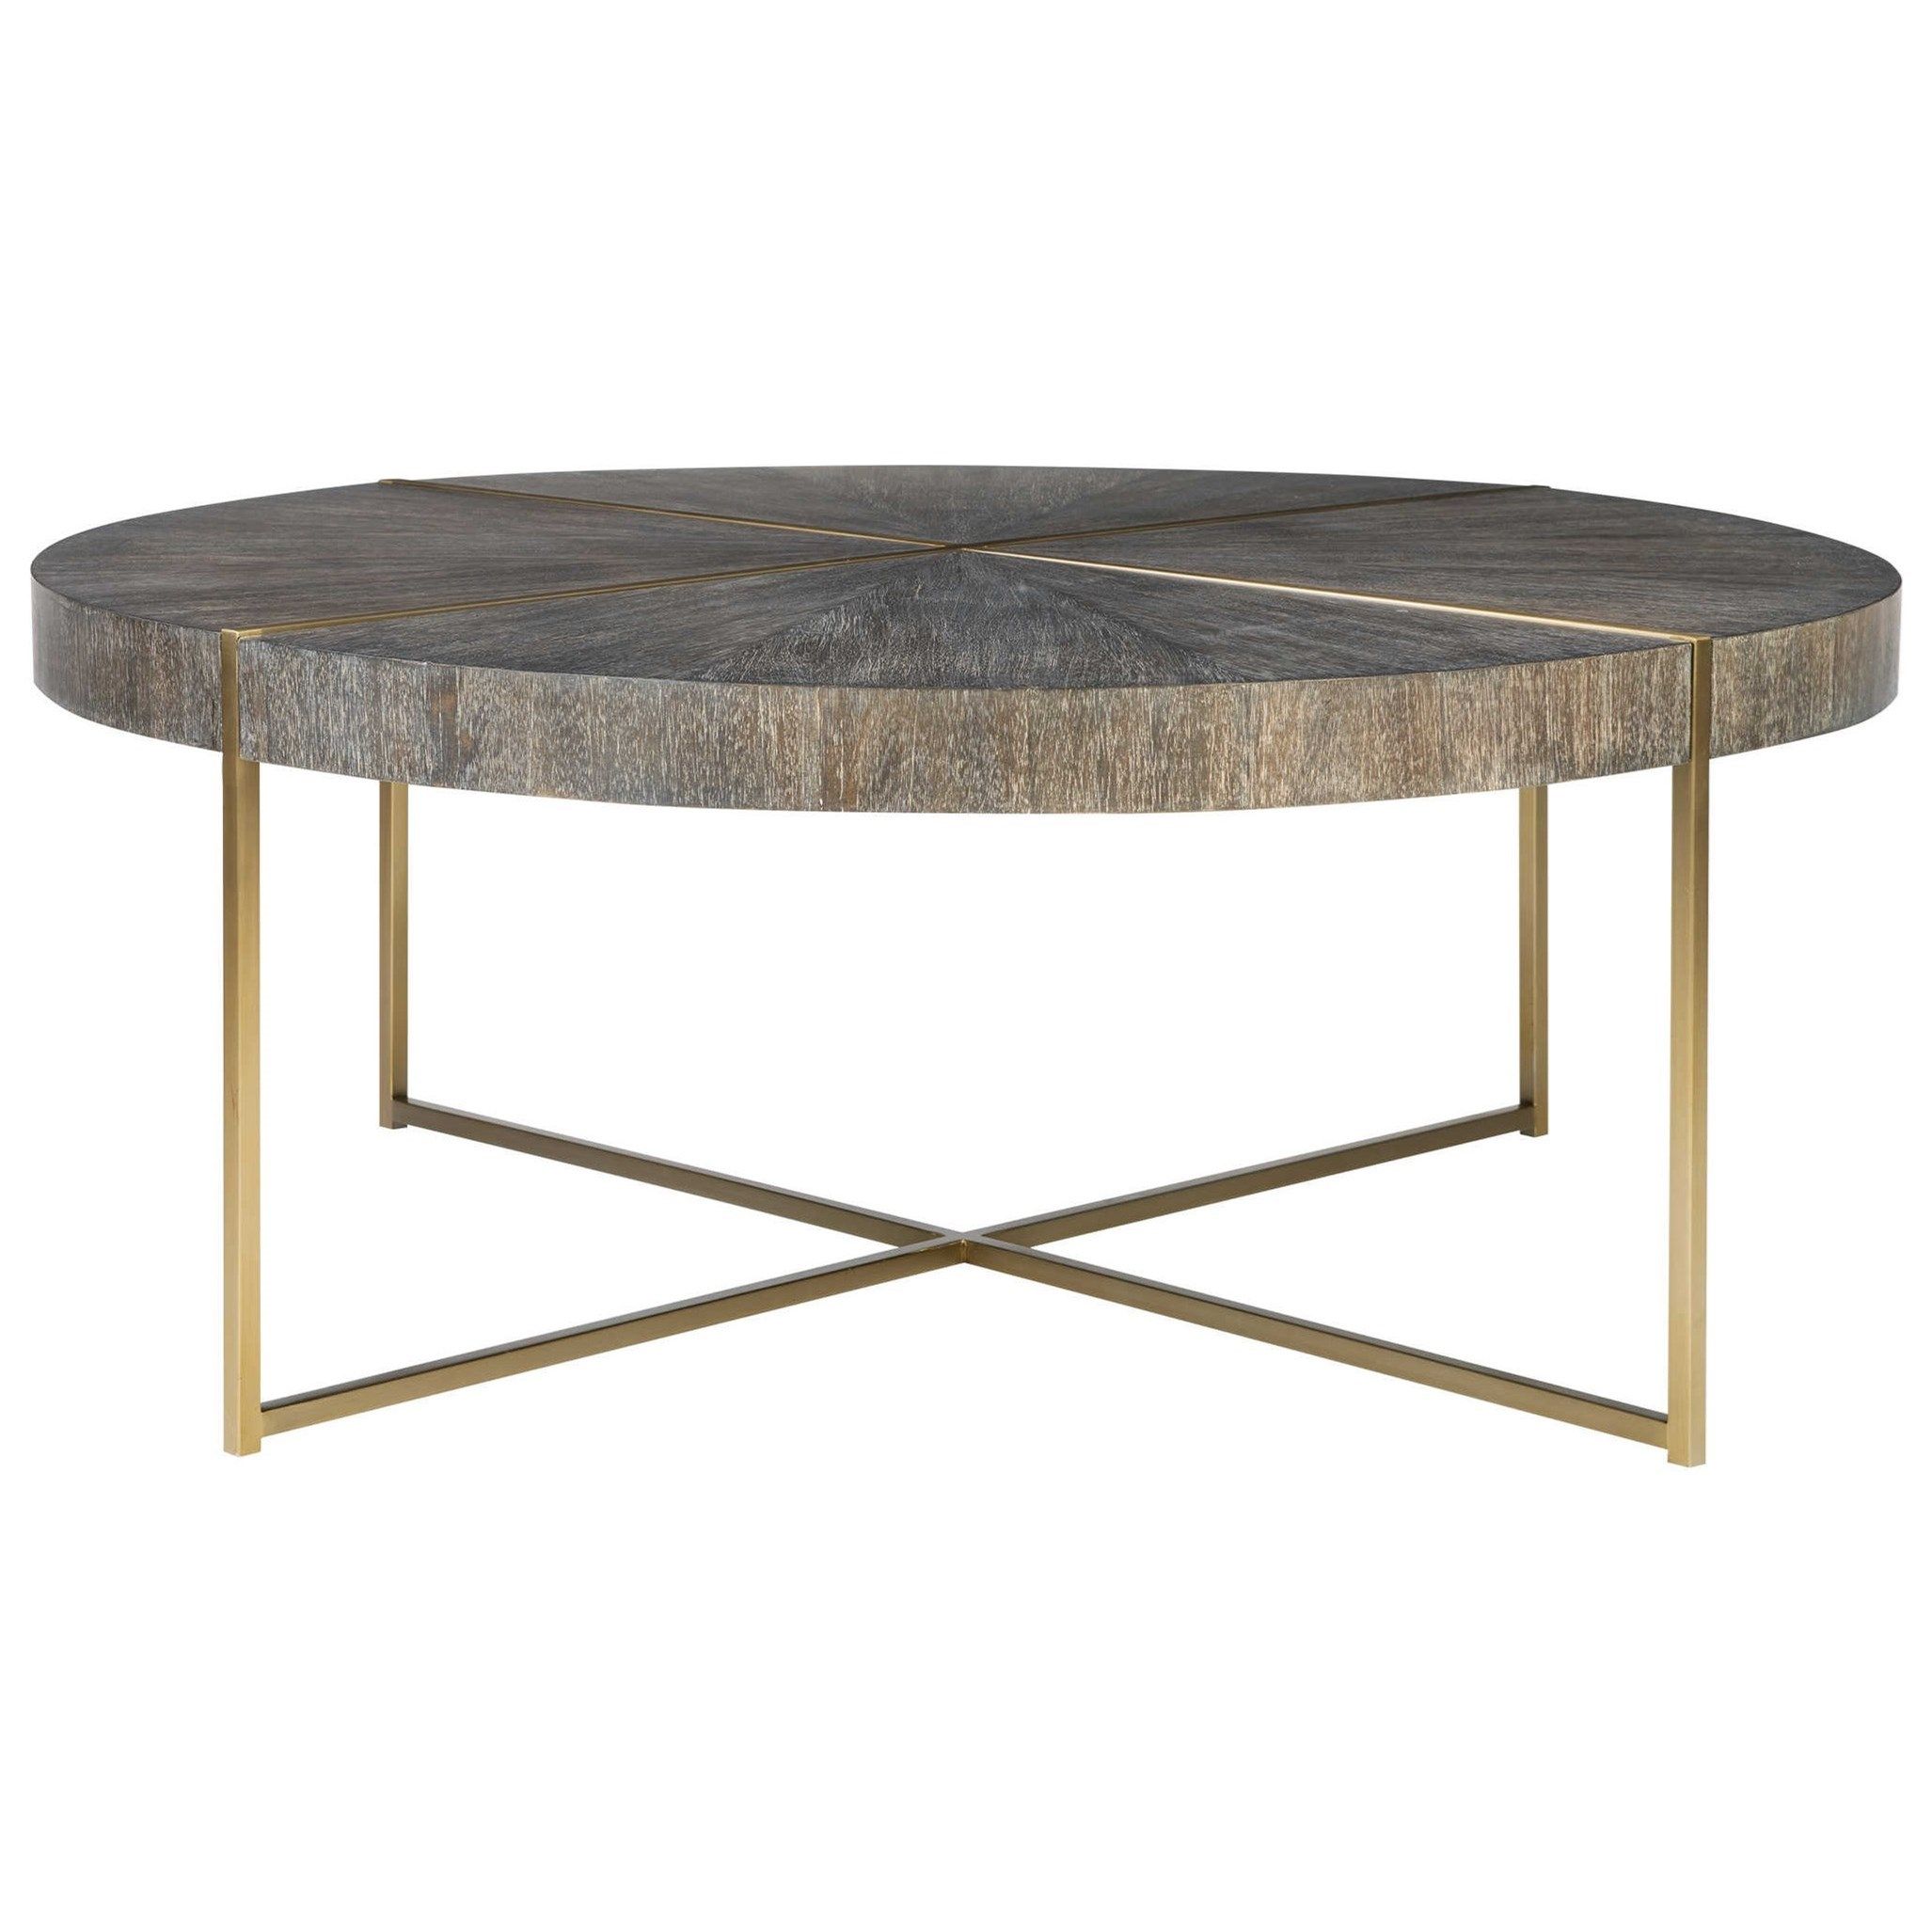 Uttermost Accent Furniture – Occasional Tables Taja Round Coffee Table Regarding Occasional Coffee Tables (View 11 of 20)